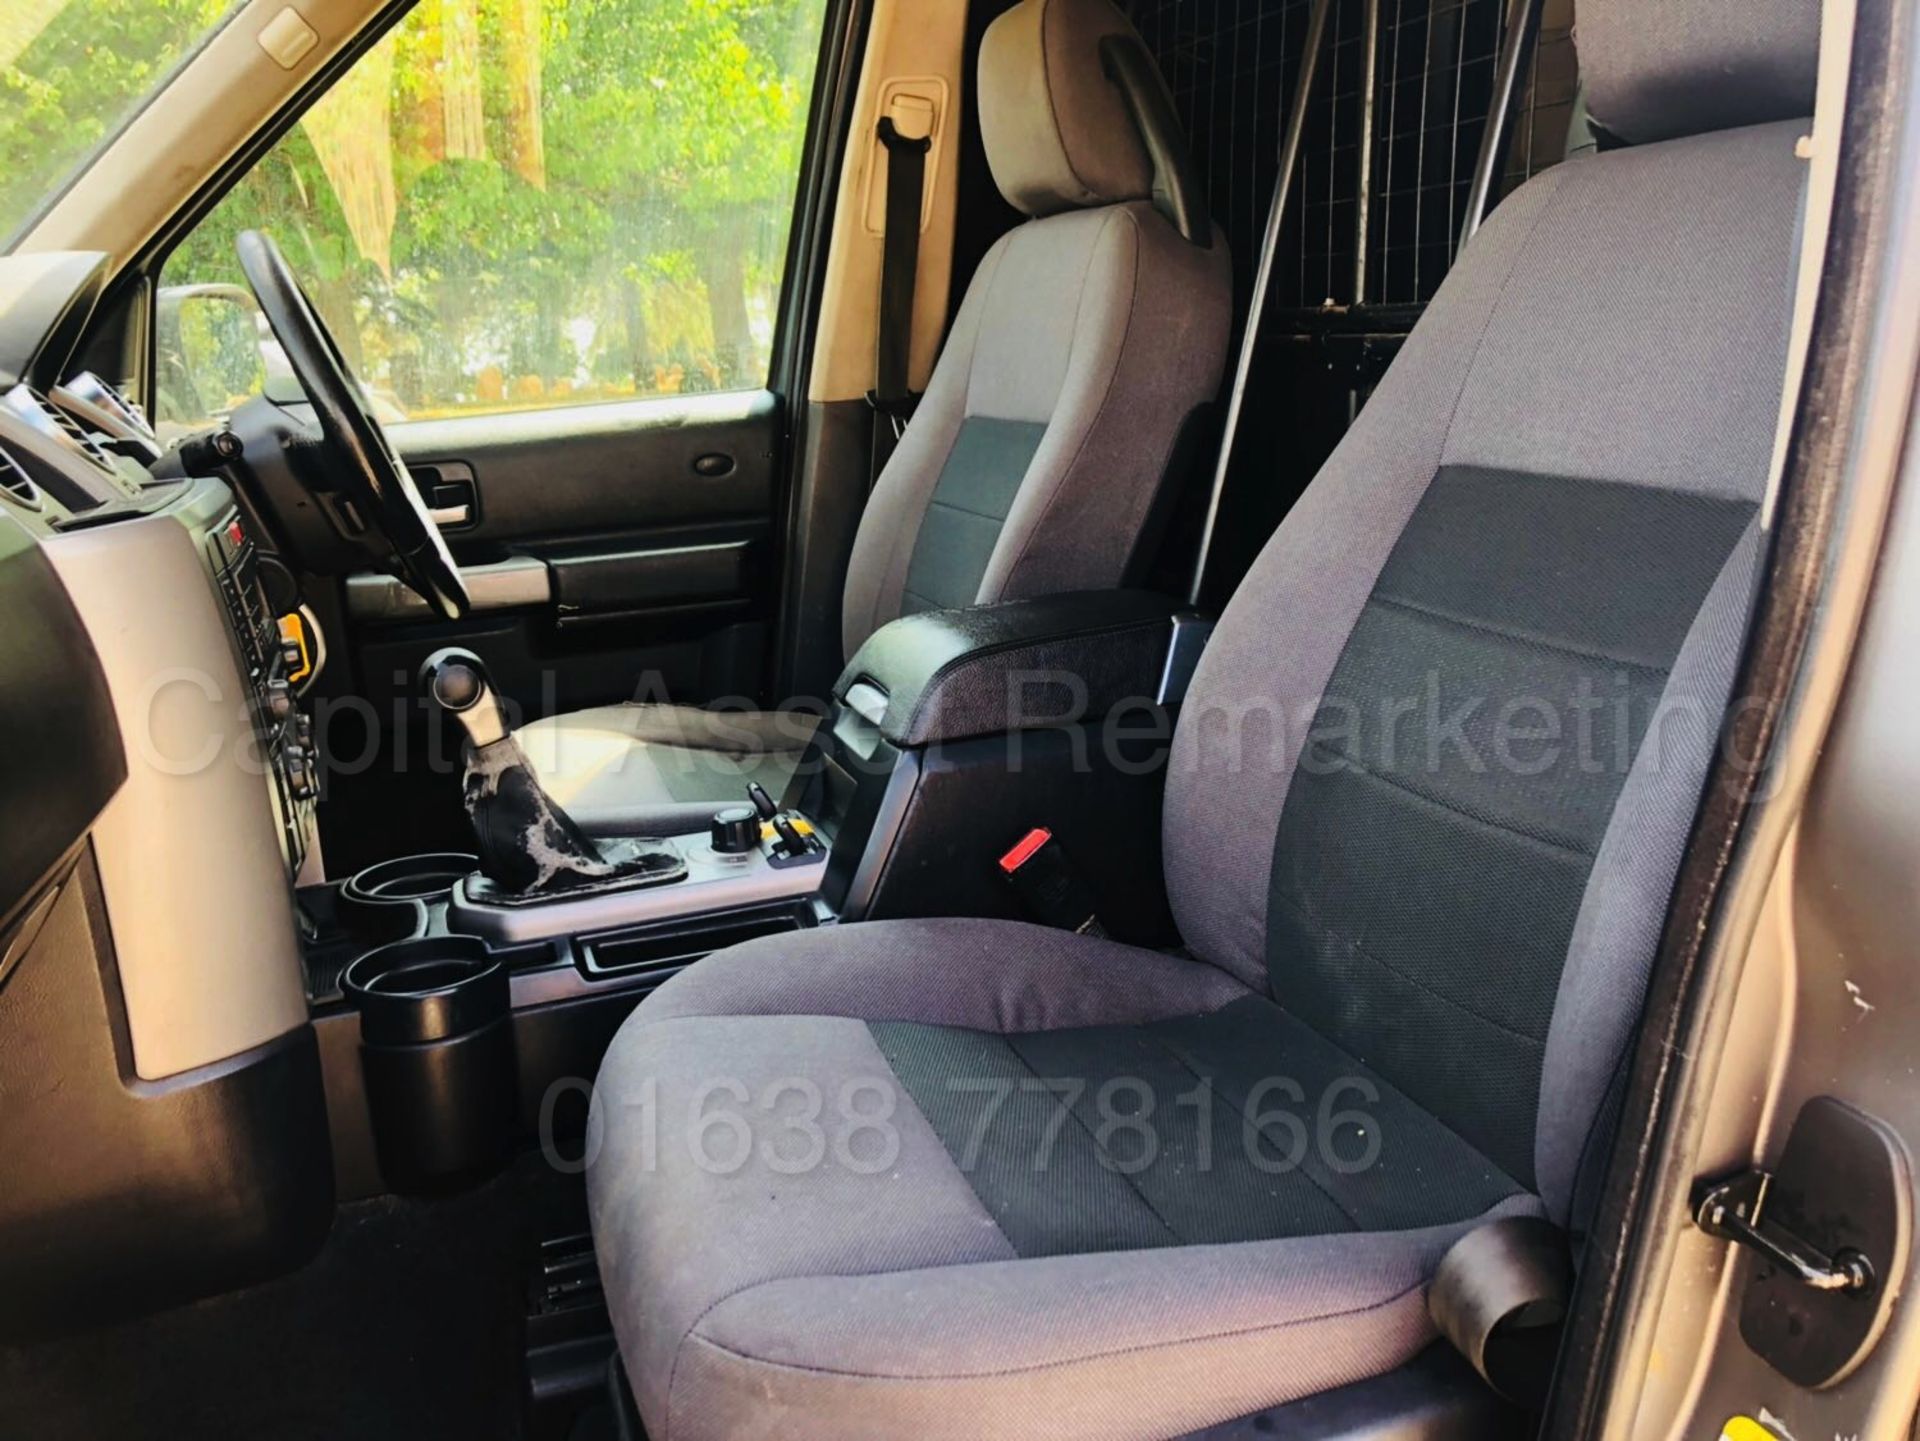 (On Sale) LAND ROVER DISCOVERY 3 'XS EDITION' **COMMERCIAL VAN**(2008 MODEL) 'TDV6-190 BHP' (NO VAT) - Image 20 of 37